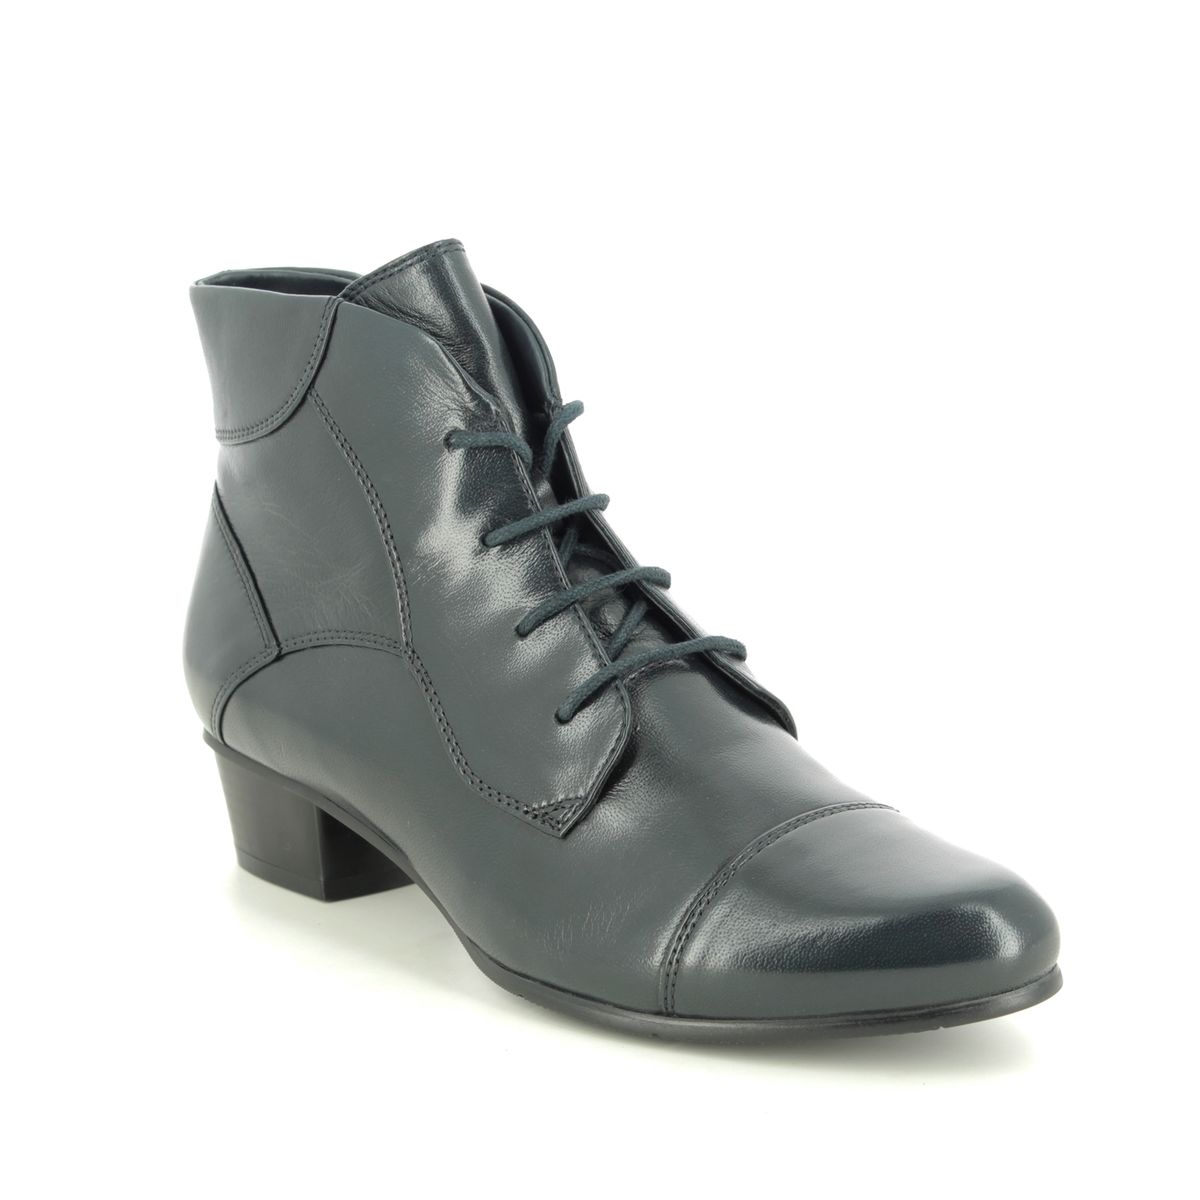 Regarde le Ciel Stefany 123 Lace Navy leather Womens Lace Up Boots 0123-150 in a Plain Leather in Size 37